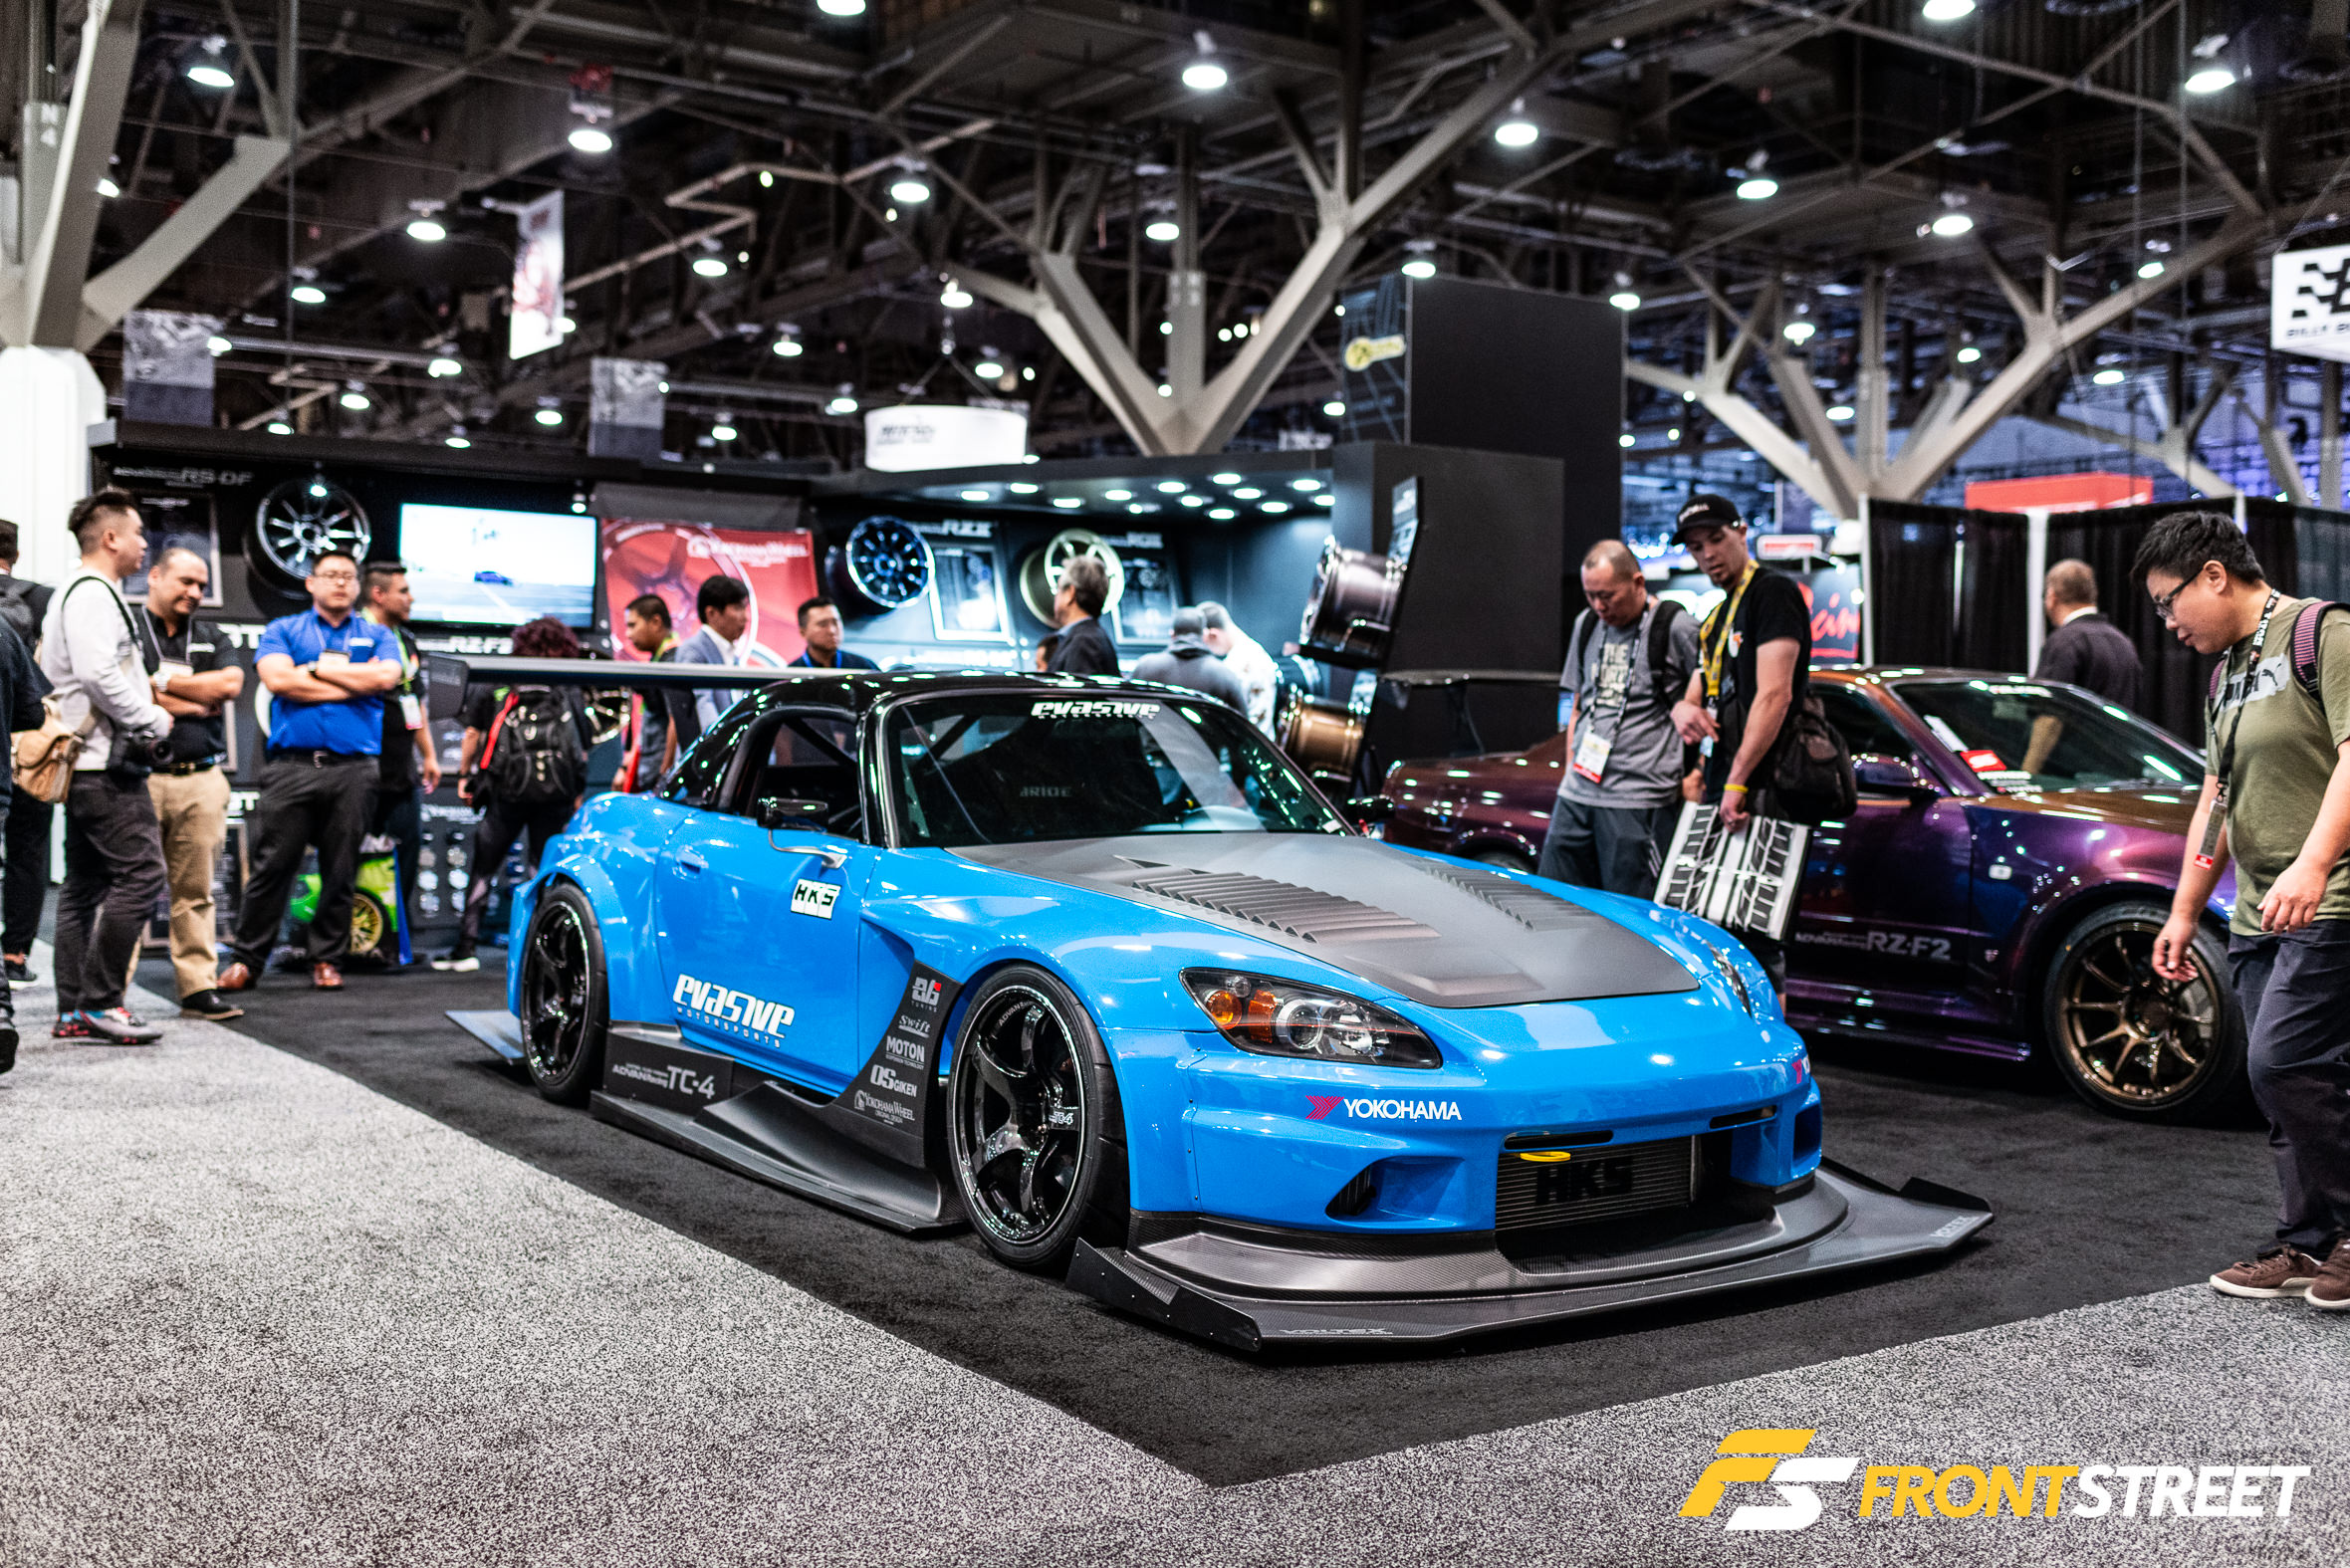 From The Archives: A Collection Of The Wildest S2000s We've Published